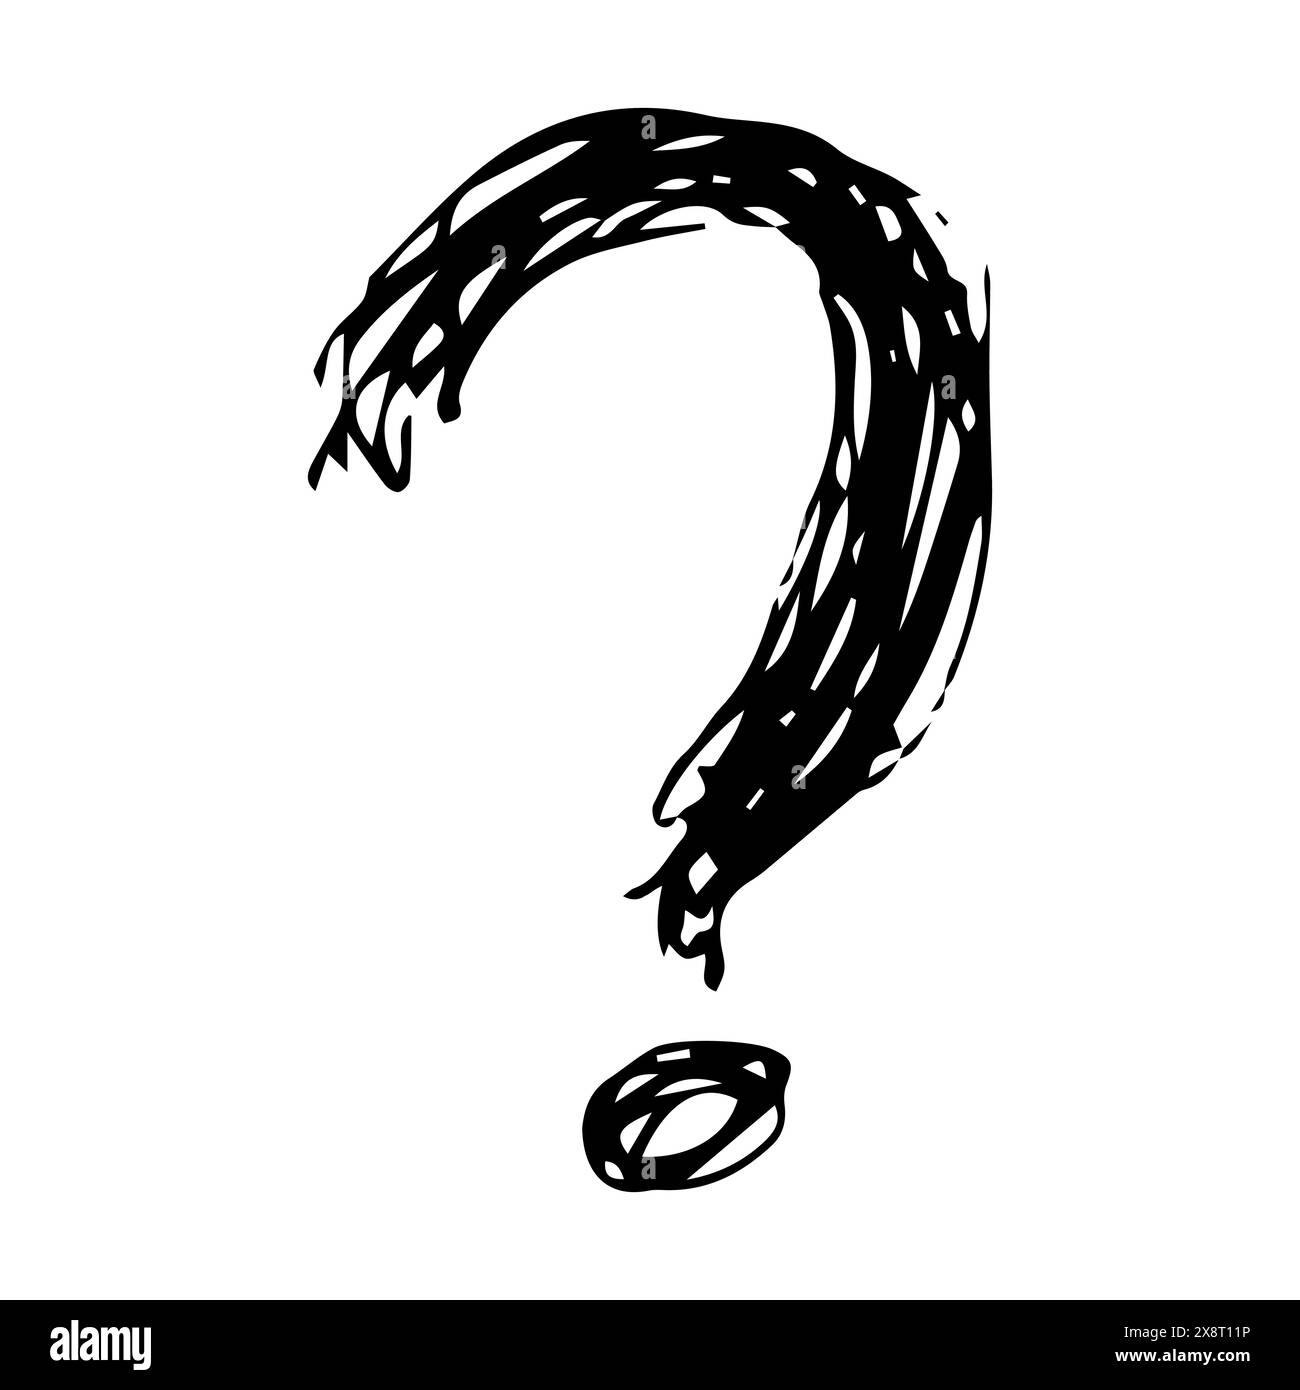 Hand drawn question mark symbol. Black sketch question mark symbol on white background. Stock Vector